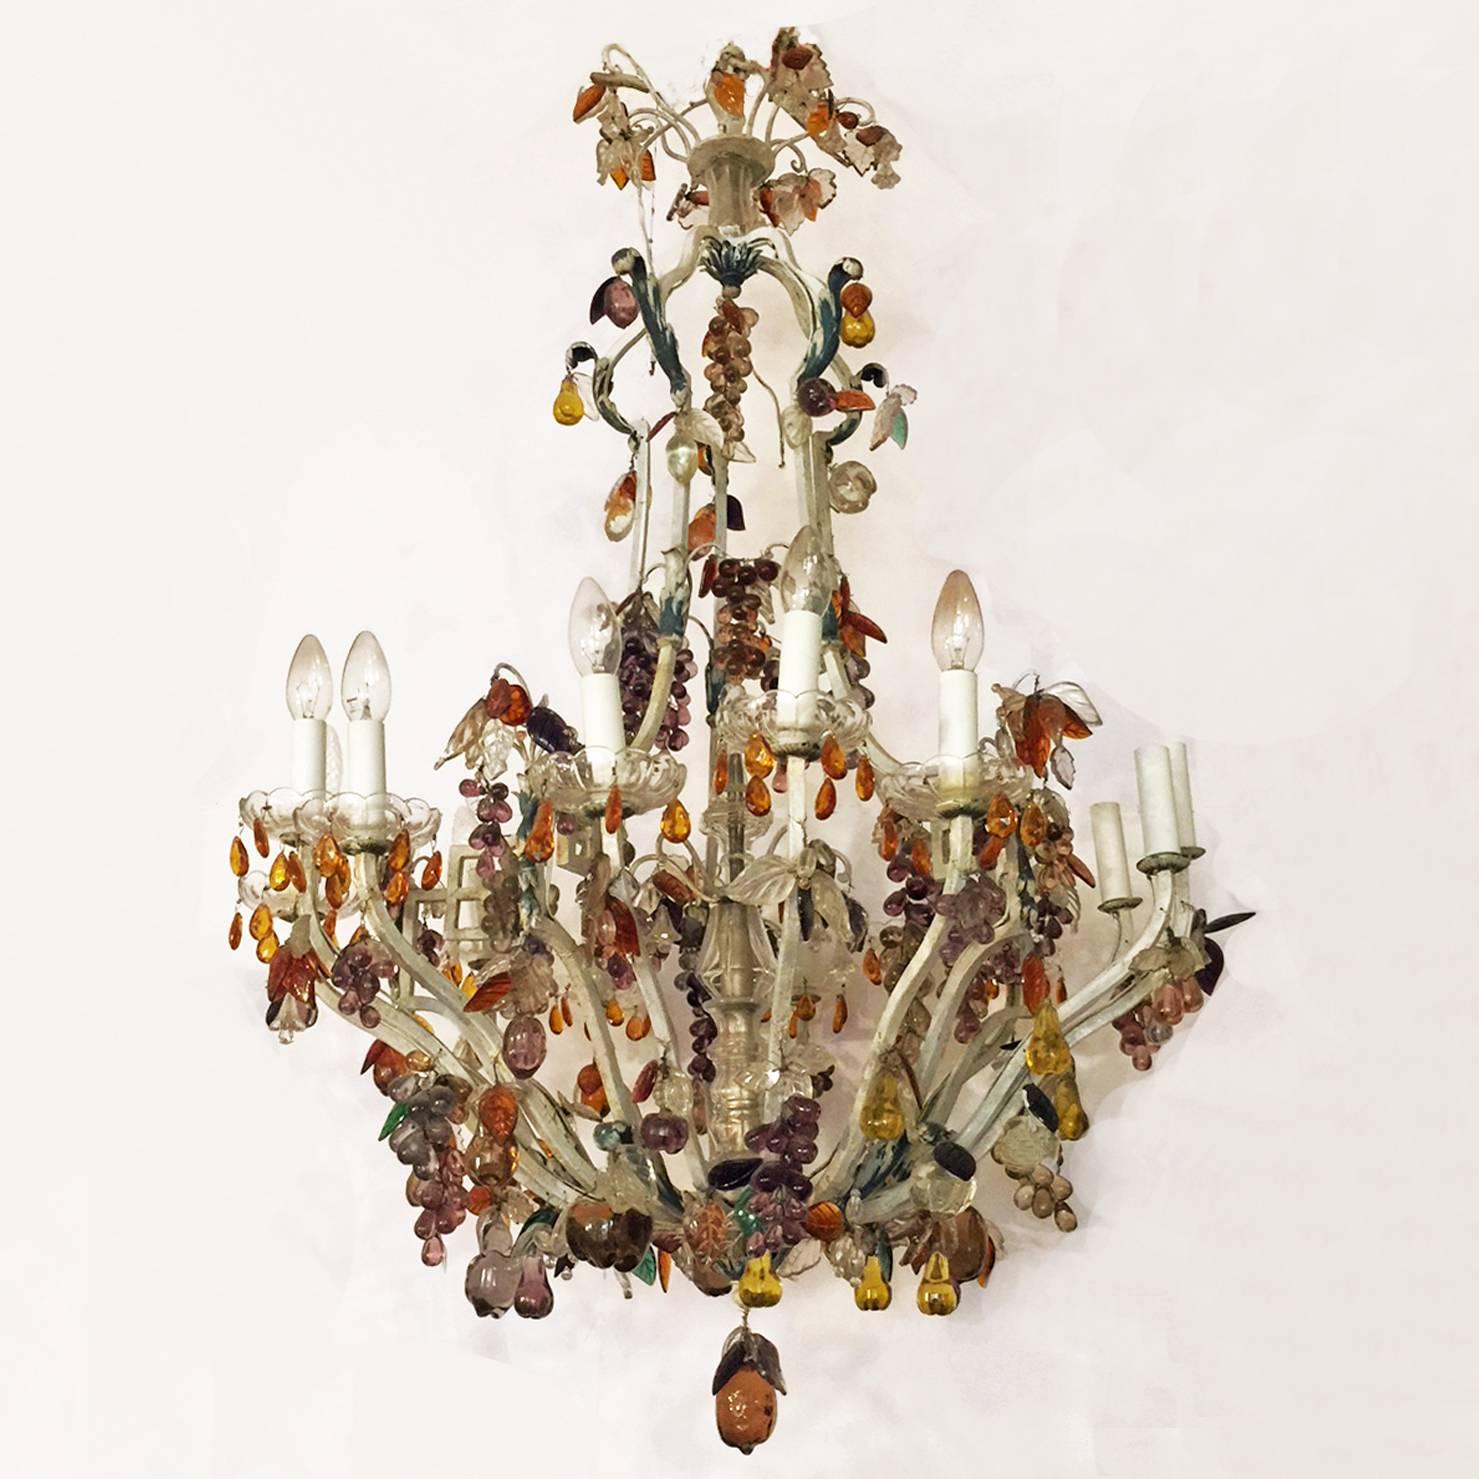 Charming Italian bronze and crystal chandelier embellished with fruit pendants in colored glass.
The main structure of the chandelier features 15 branches in painted bronze.
Each branch has one light and transparent crystal drip pan.
The